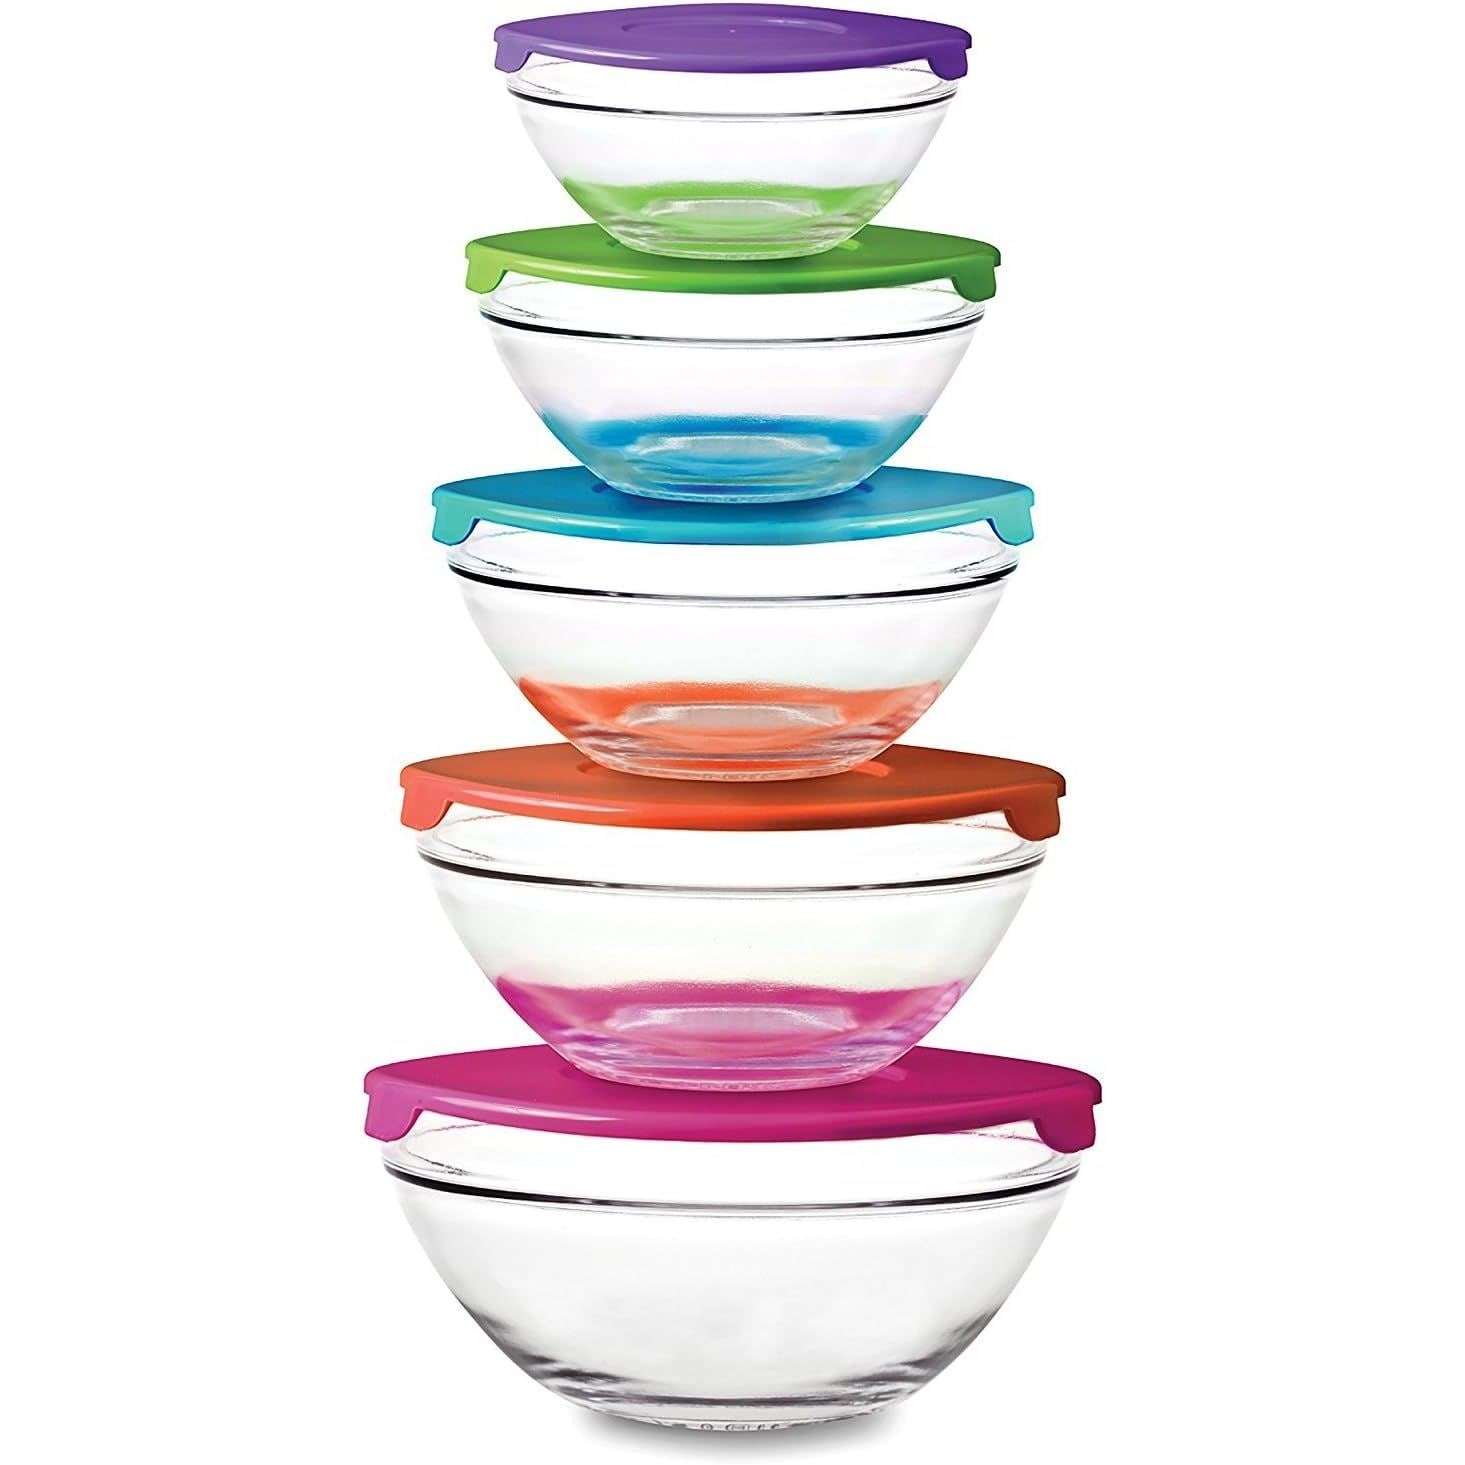 https://ak1.ostkcdn.com/images/products/is/images/direct/a880864ffd43e9d41b6a1eb01b260d33da3b5161/PKP-10-Piece-Glass-Bowl-Set-with-Plastic-Lids.jpg